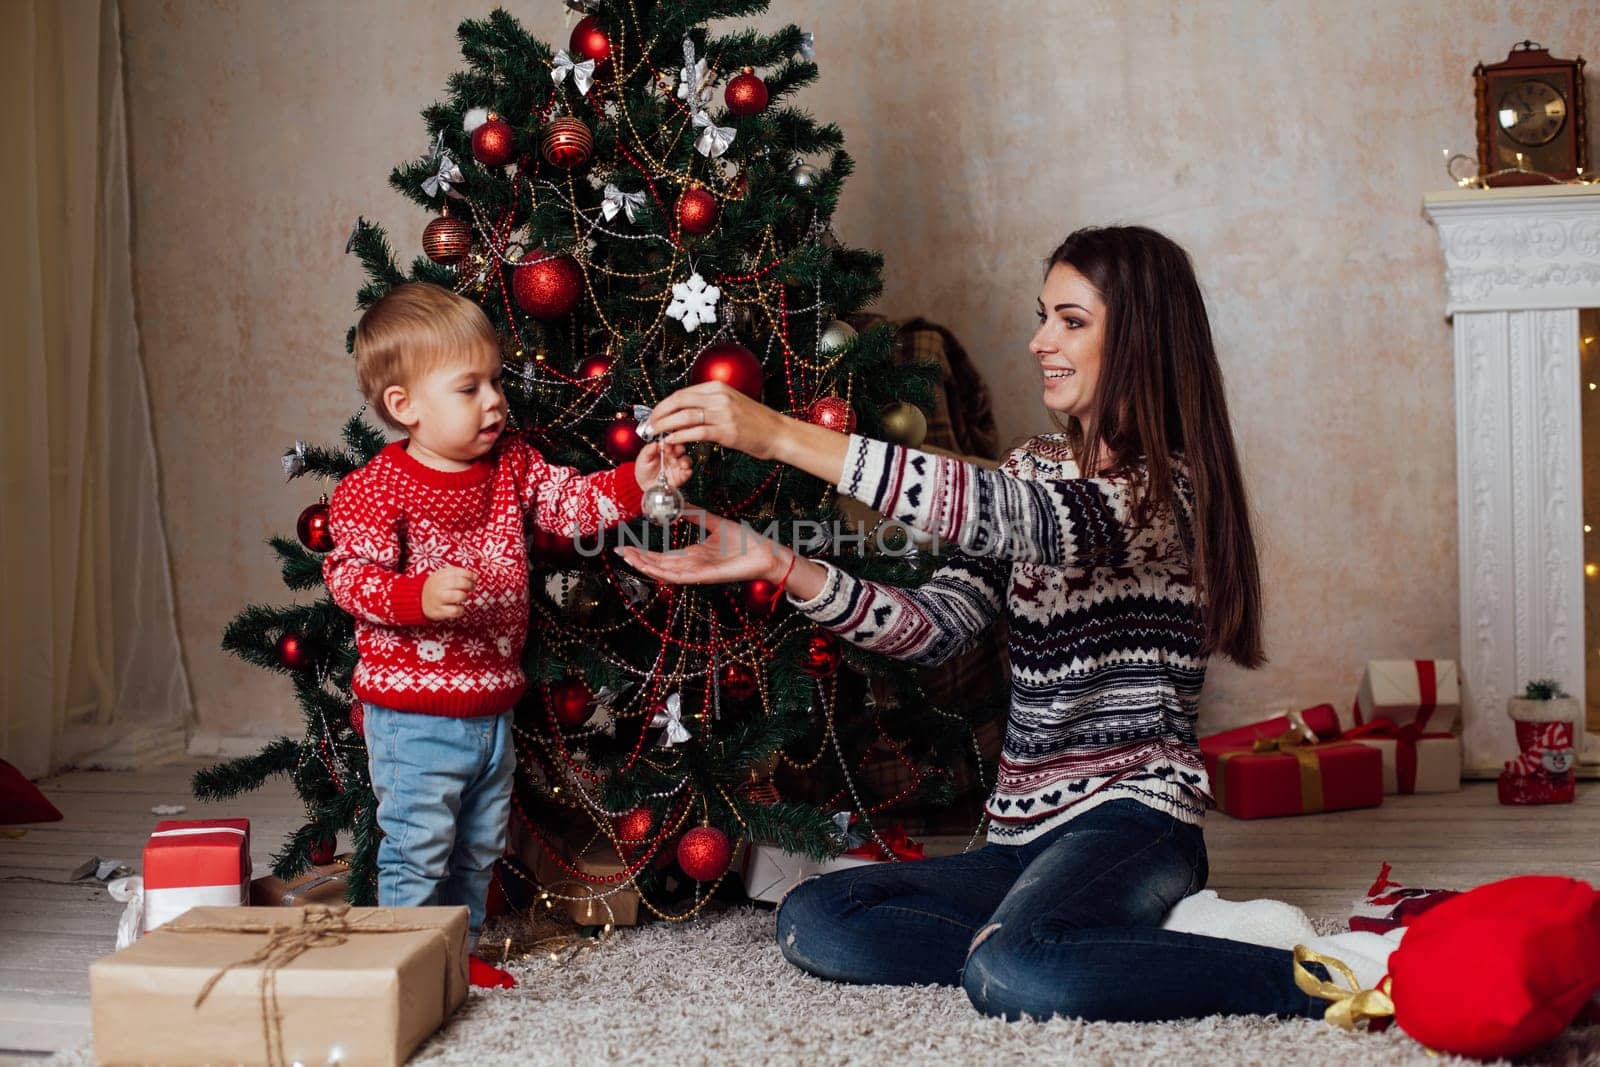 mom with son decorate the Christmas tree on new year's Day Gifts Christmas